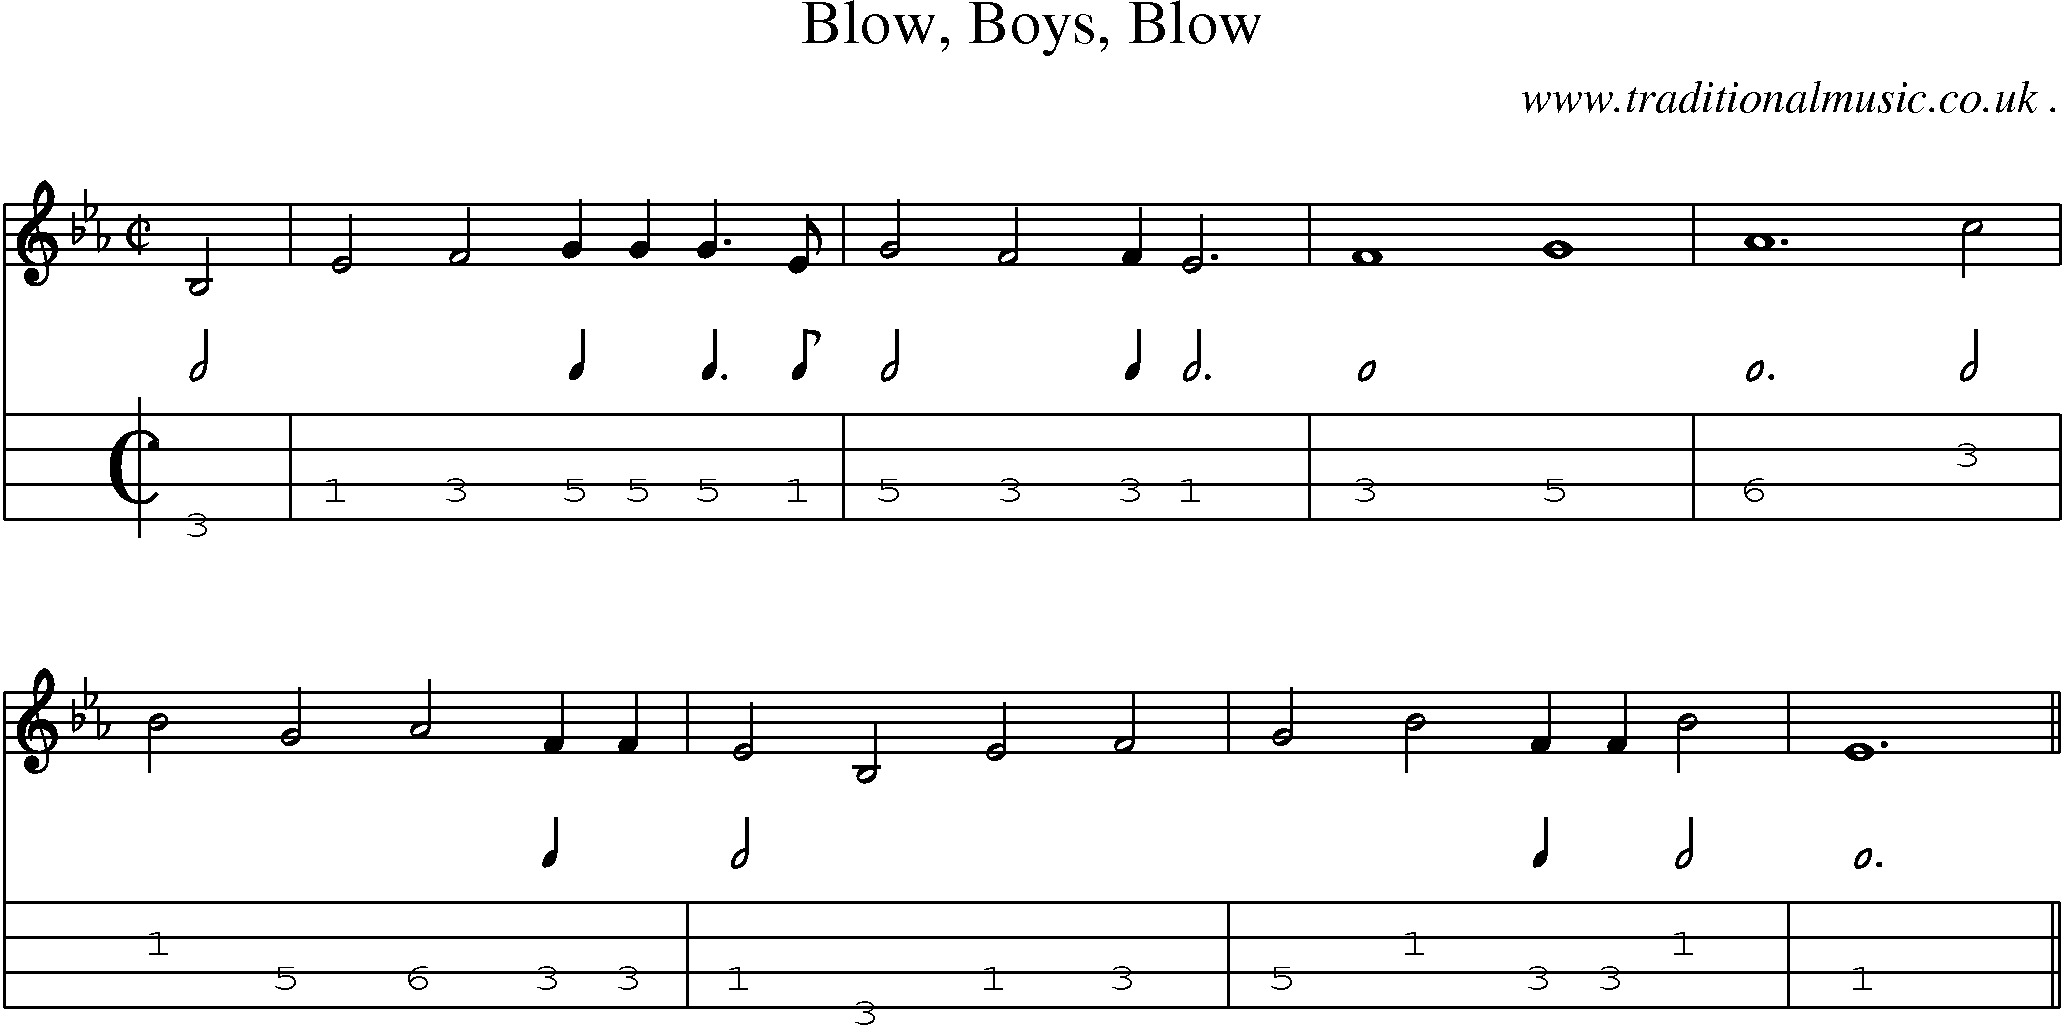 Sheet-Music and Mandolin Tabs for Blow Boys Blow